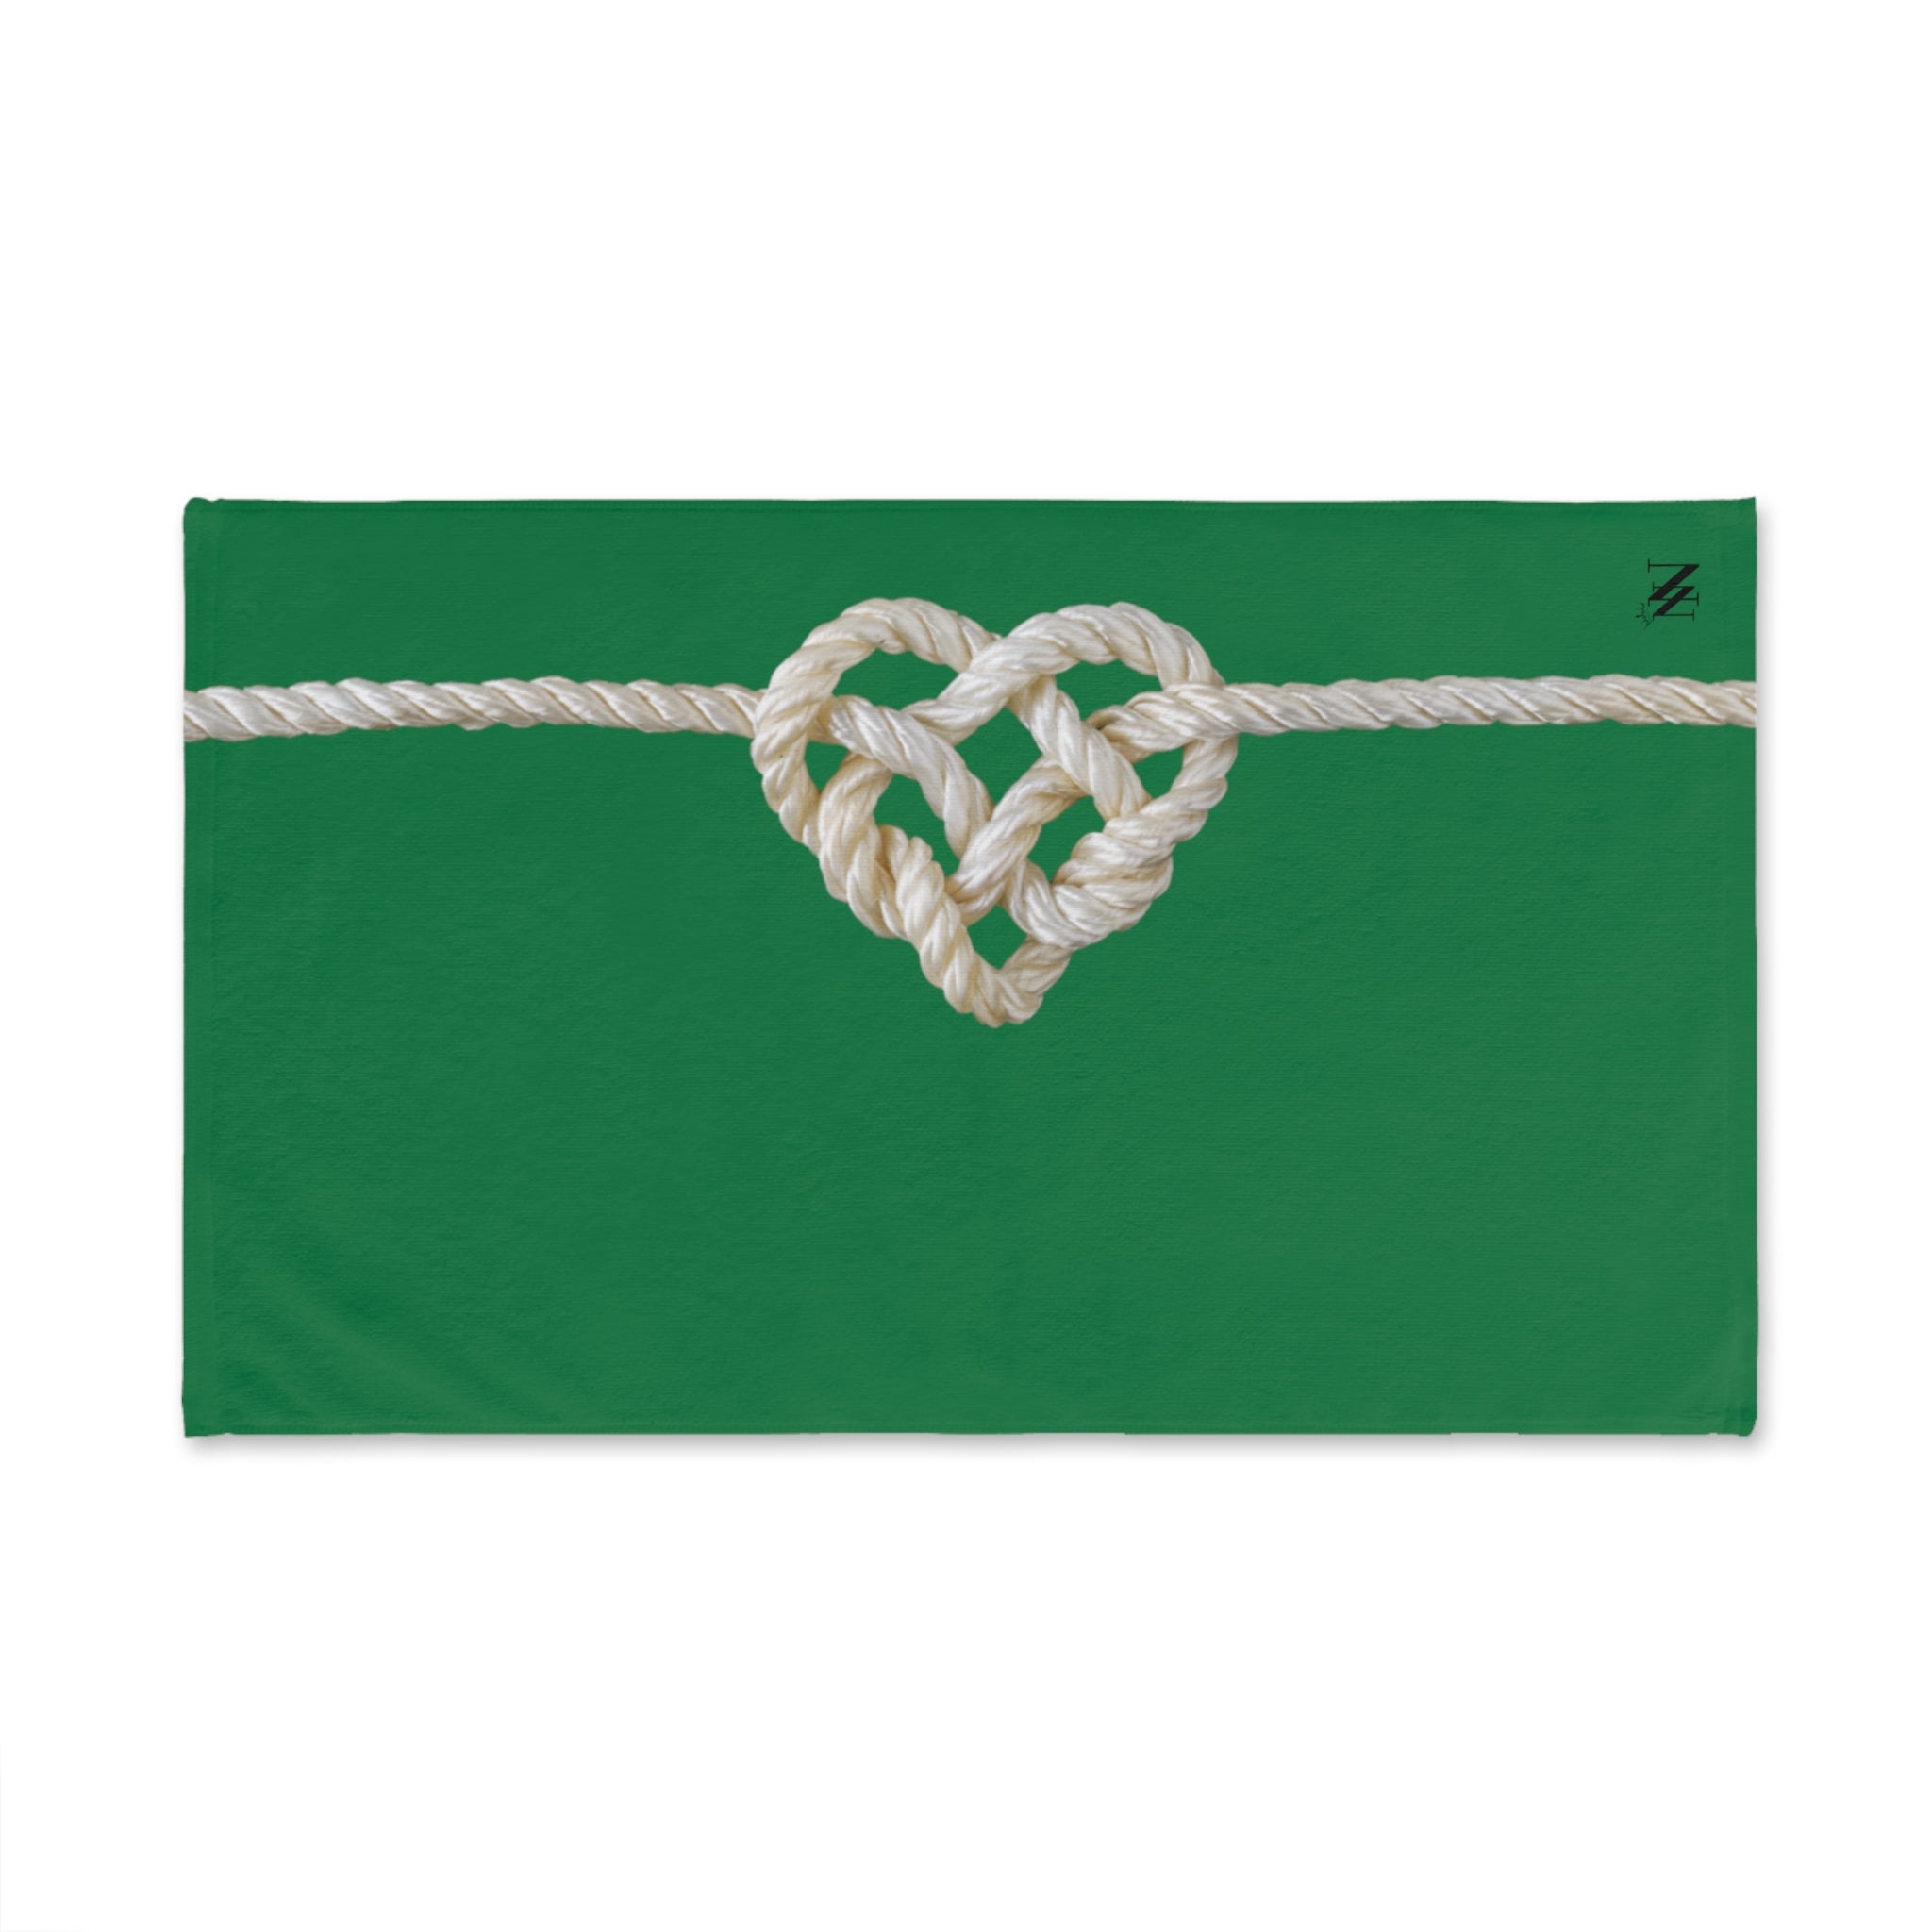 Heart Knot Green | Anniversary Wedding, Christmas, Valentines Day, Birthday Gifts for Him, Her, Romantic Gifts for Wife, Girlfriend, Couples Gifts for Boyfriend, Husband NECTAR NAPKINS